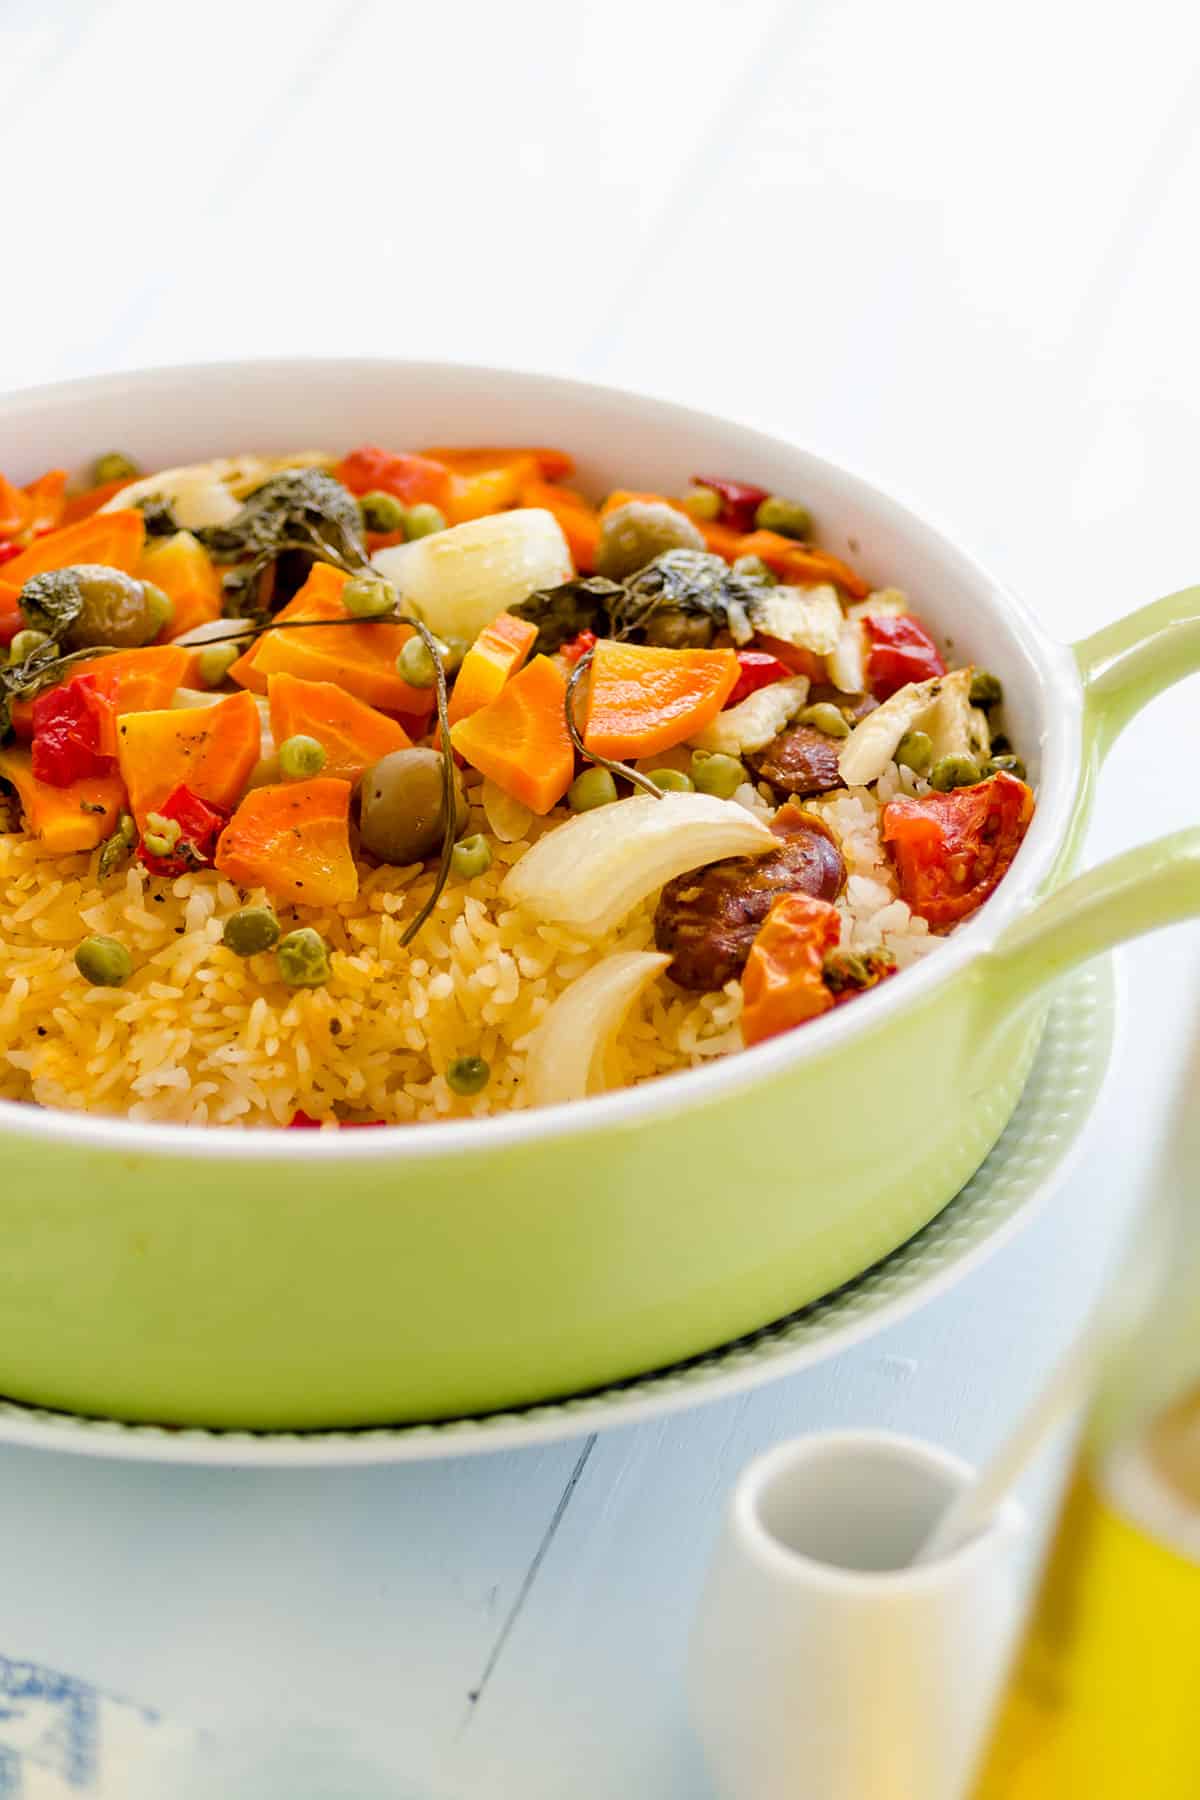 Vegetables, chorizo and rice casserole cooked in the oven.